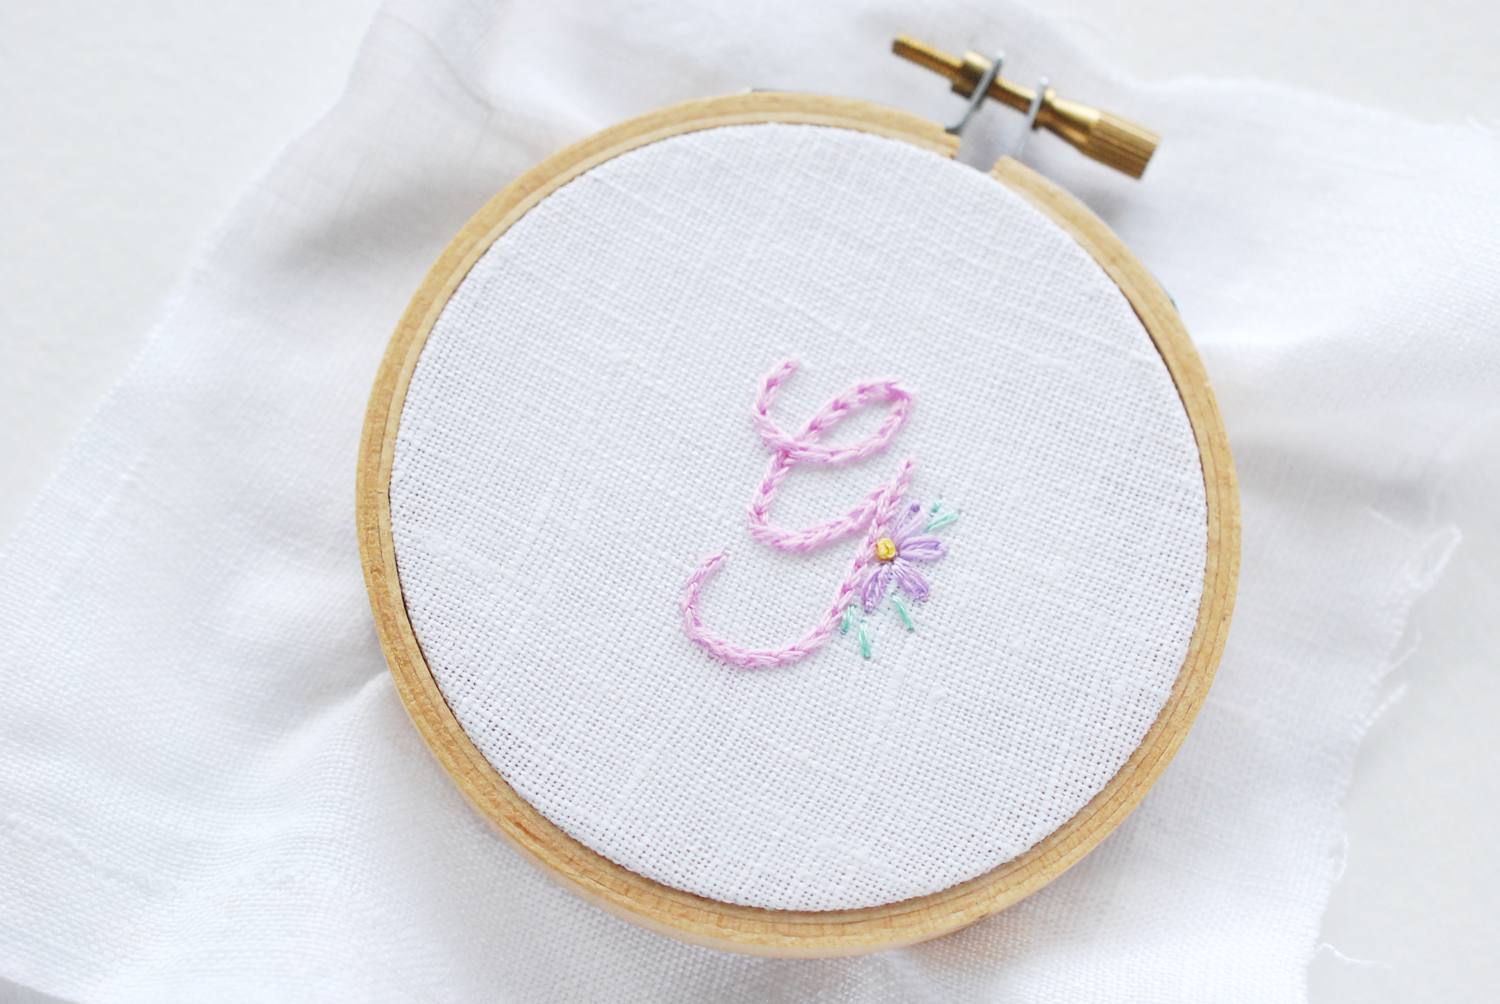 Hand Embroidery Alphabet Patterns Free Alphabet Pattern For Monogram Embroidery